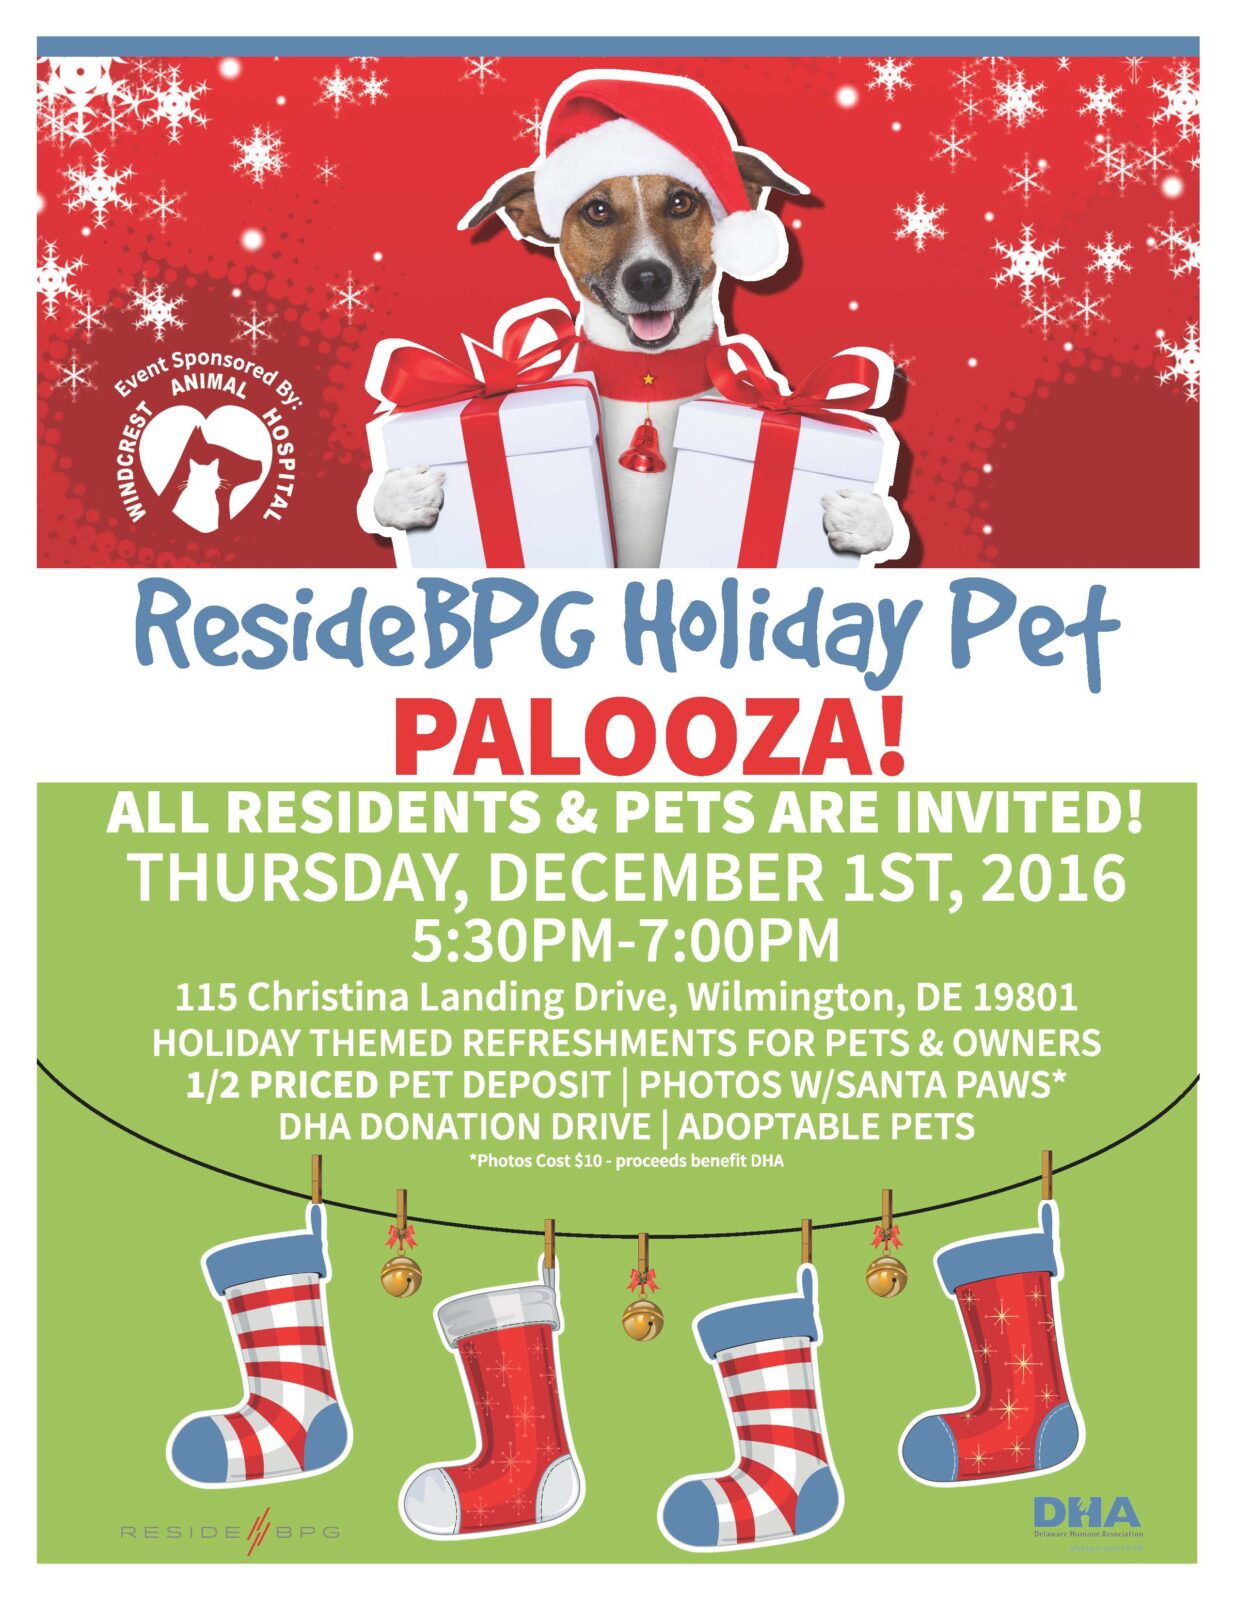 ResideBPG Holiday Pet Palooza- All Residents and Pets Welcome